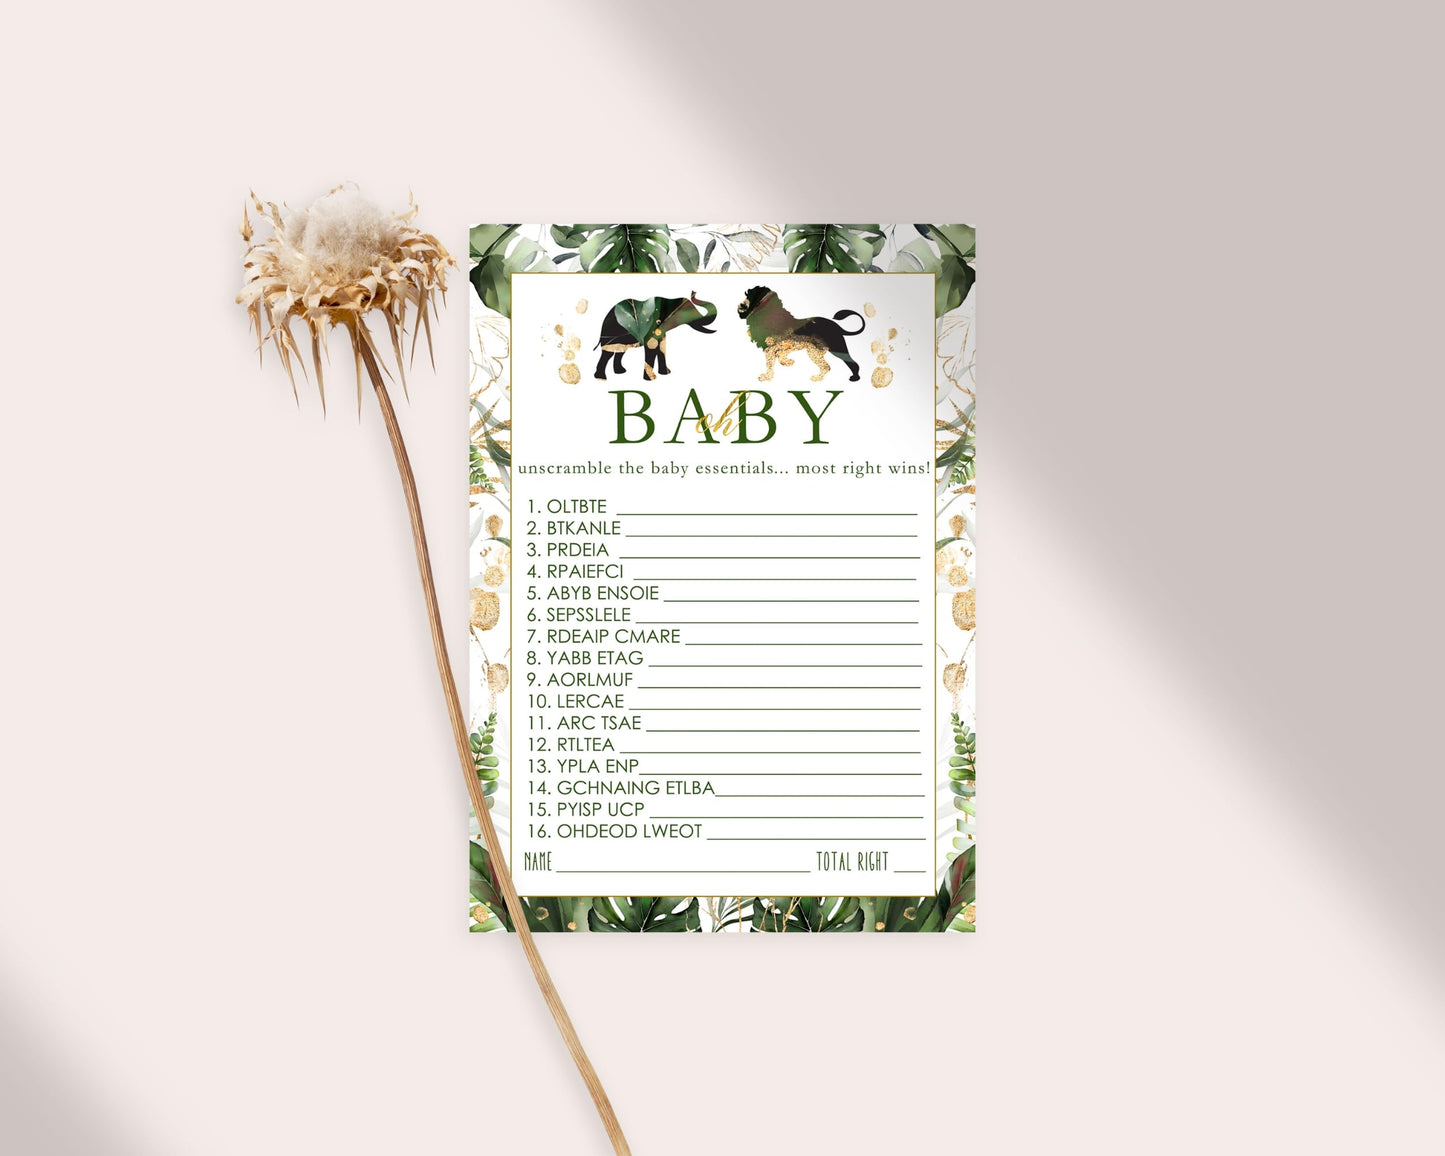 Tropical Jungle Baby Shower Word Scramble Game Cards (25 Pack) Unscramble Activity GreeneryPaper Clever Party